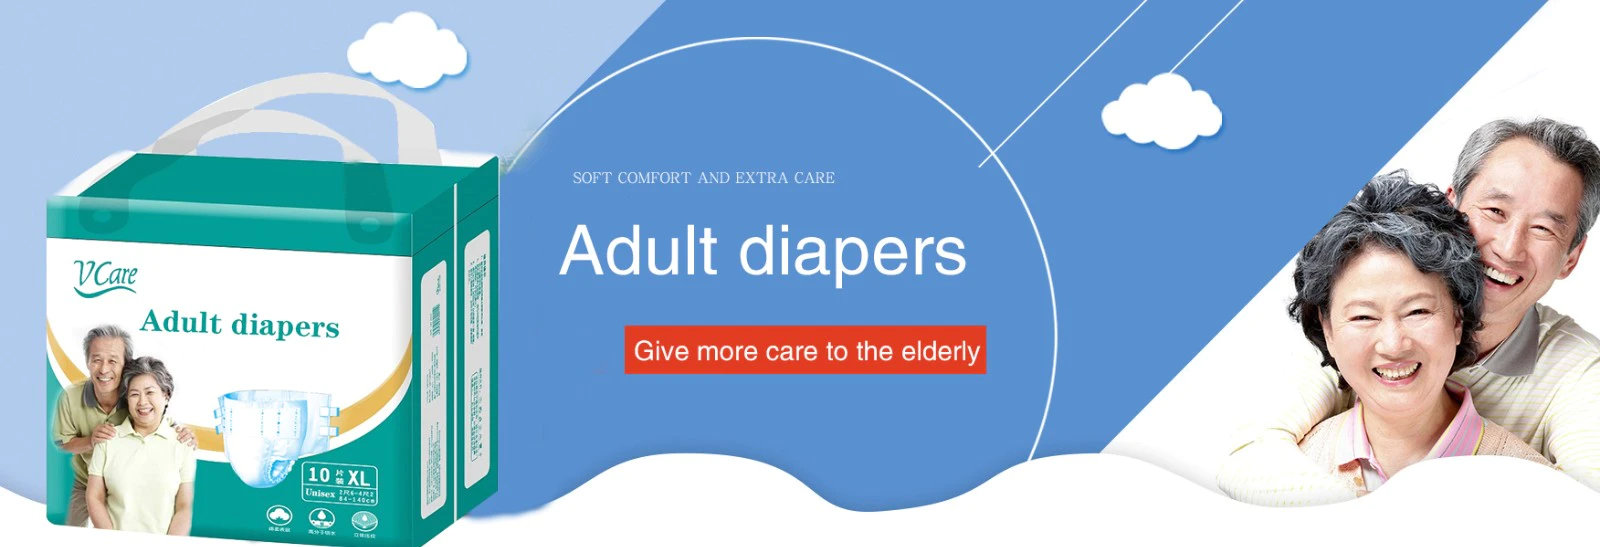 Vcare Comfortable Adult Diapers - Making Live More Easy